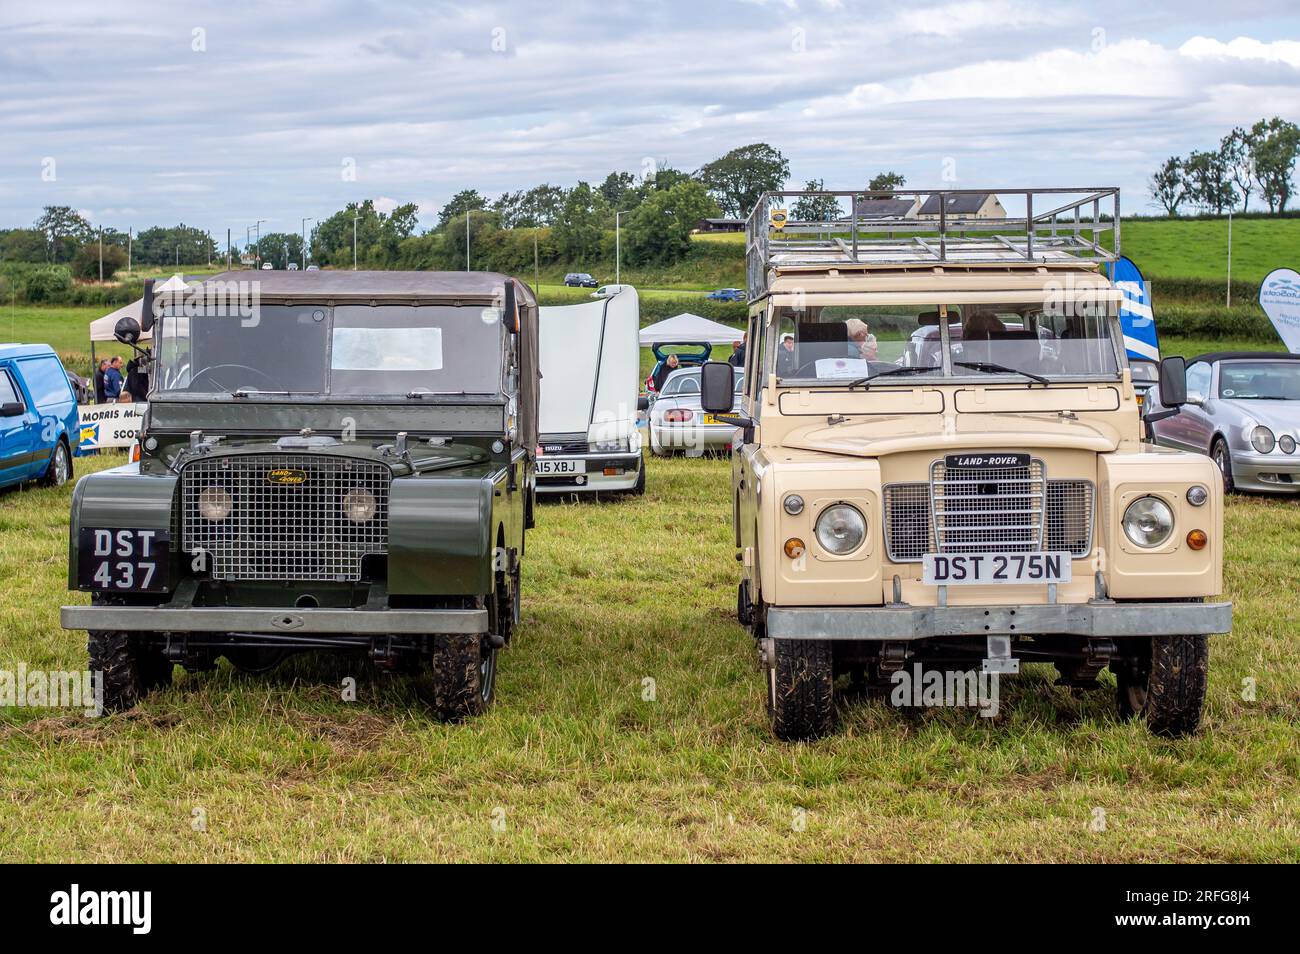 Two Land Rovers a Series 1 and a Series 3 seen at Vintage Tractor show at Ayr Stock Photo